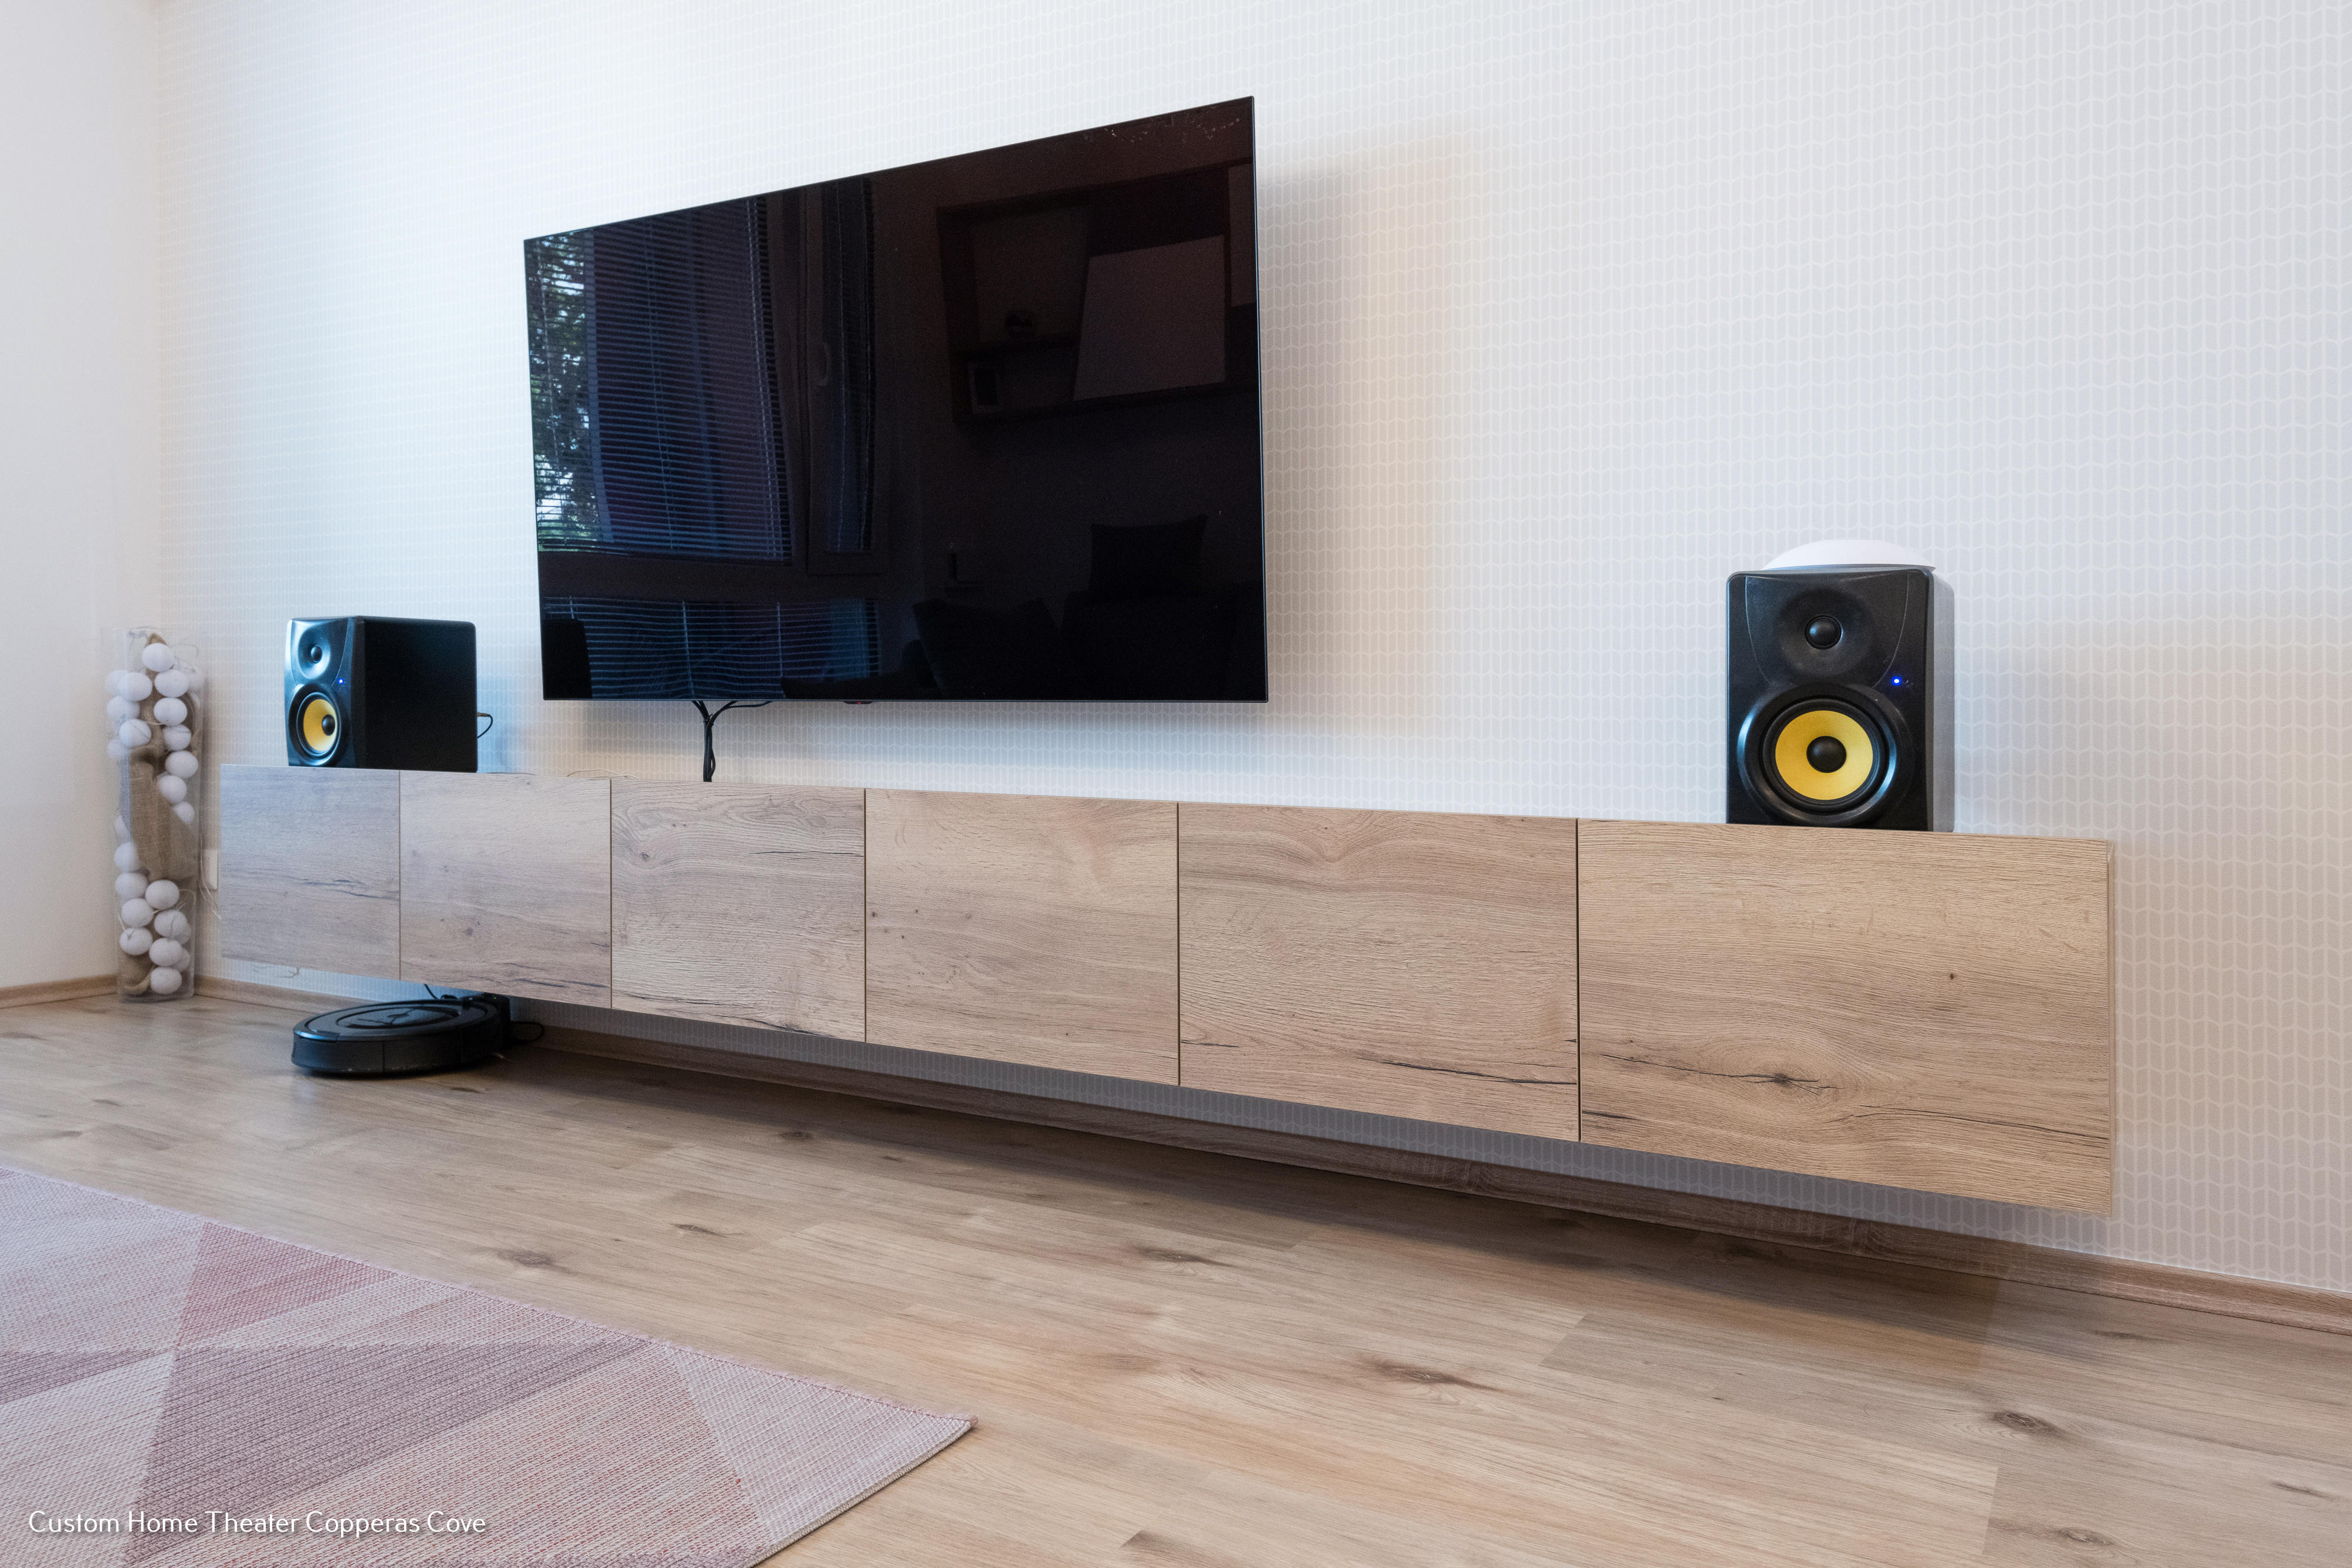 Love Tech Systems Is Offering Personalized Home Audio Installation Services In Copperas Cove, TX